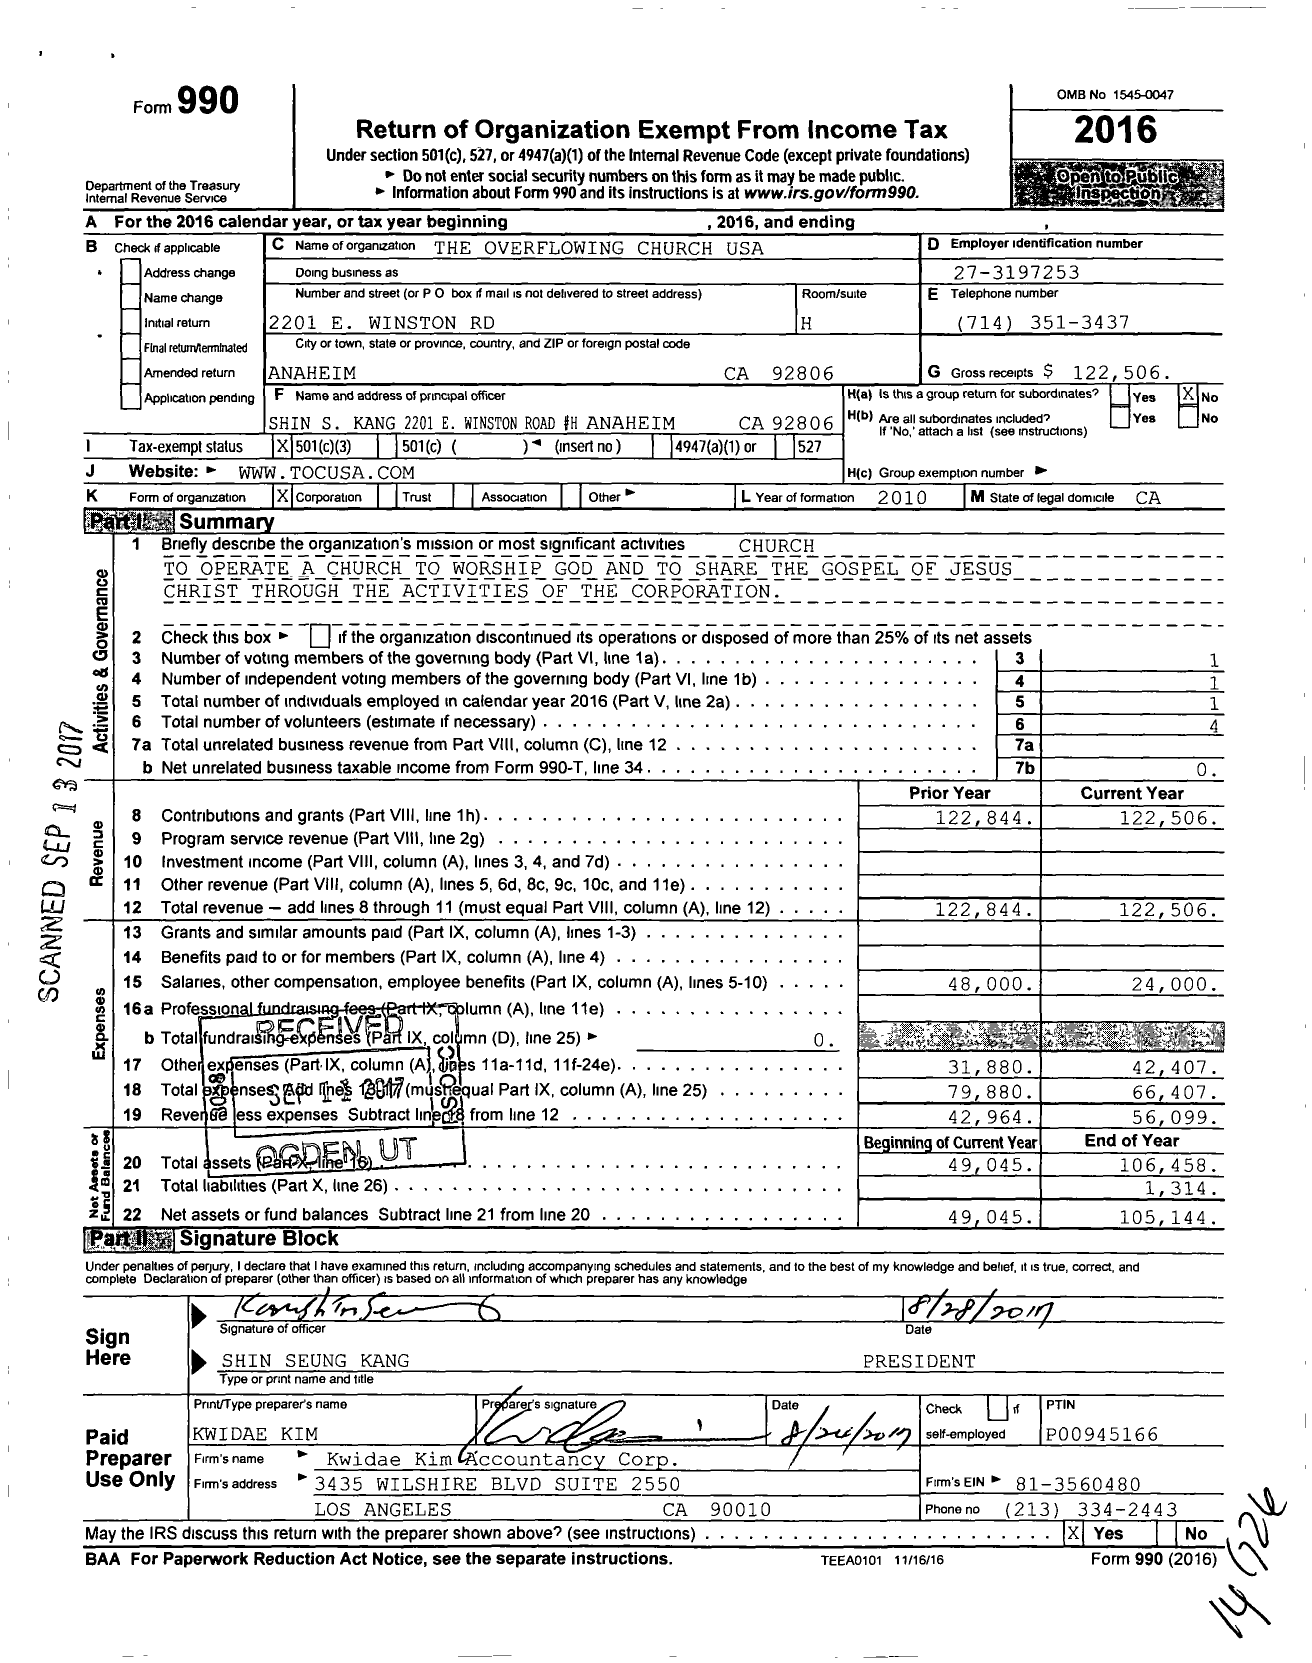 Image of first page of 2016 Form 990 for The Overflowing Church USA